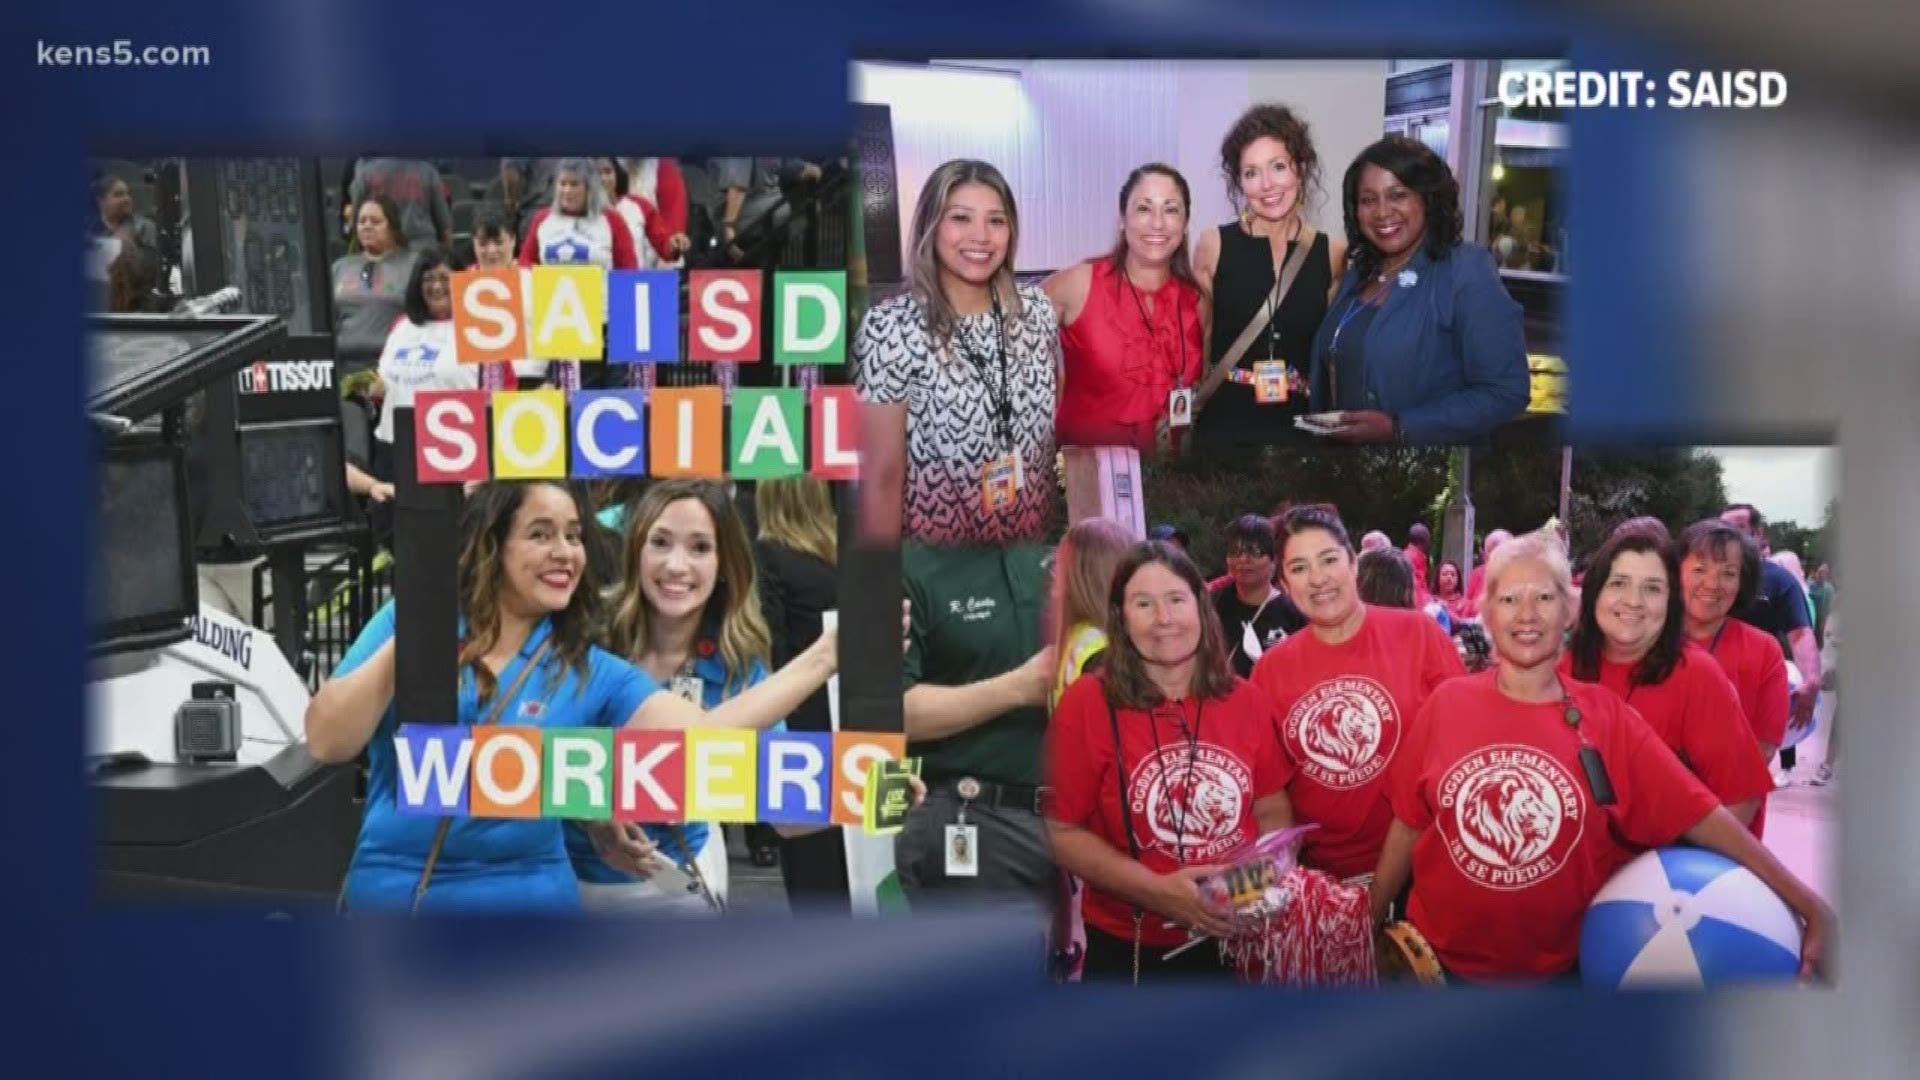 More money is on the way for San Antonio ISD employees. A pay raise is kicking in for the school year beginning this fall. But, as Eyewitness News reporter Sharon Ko explains, they're not celebrating the salary increase.